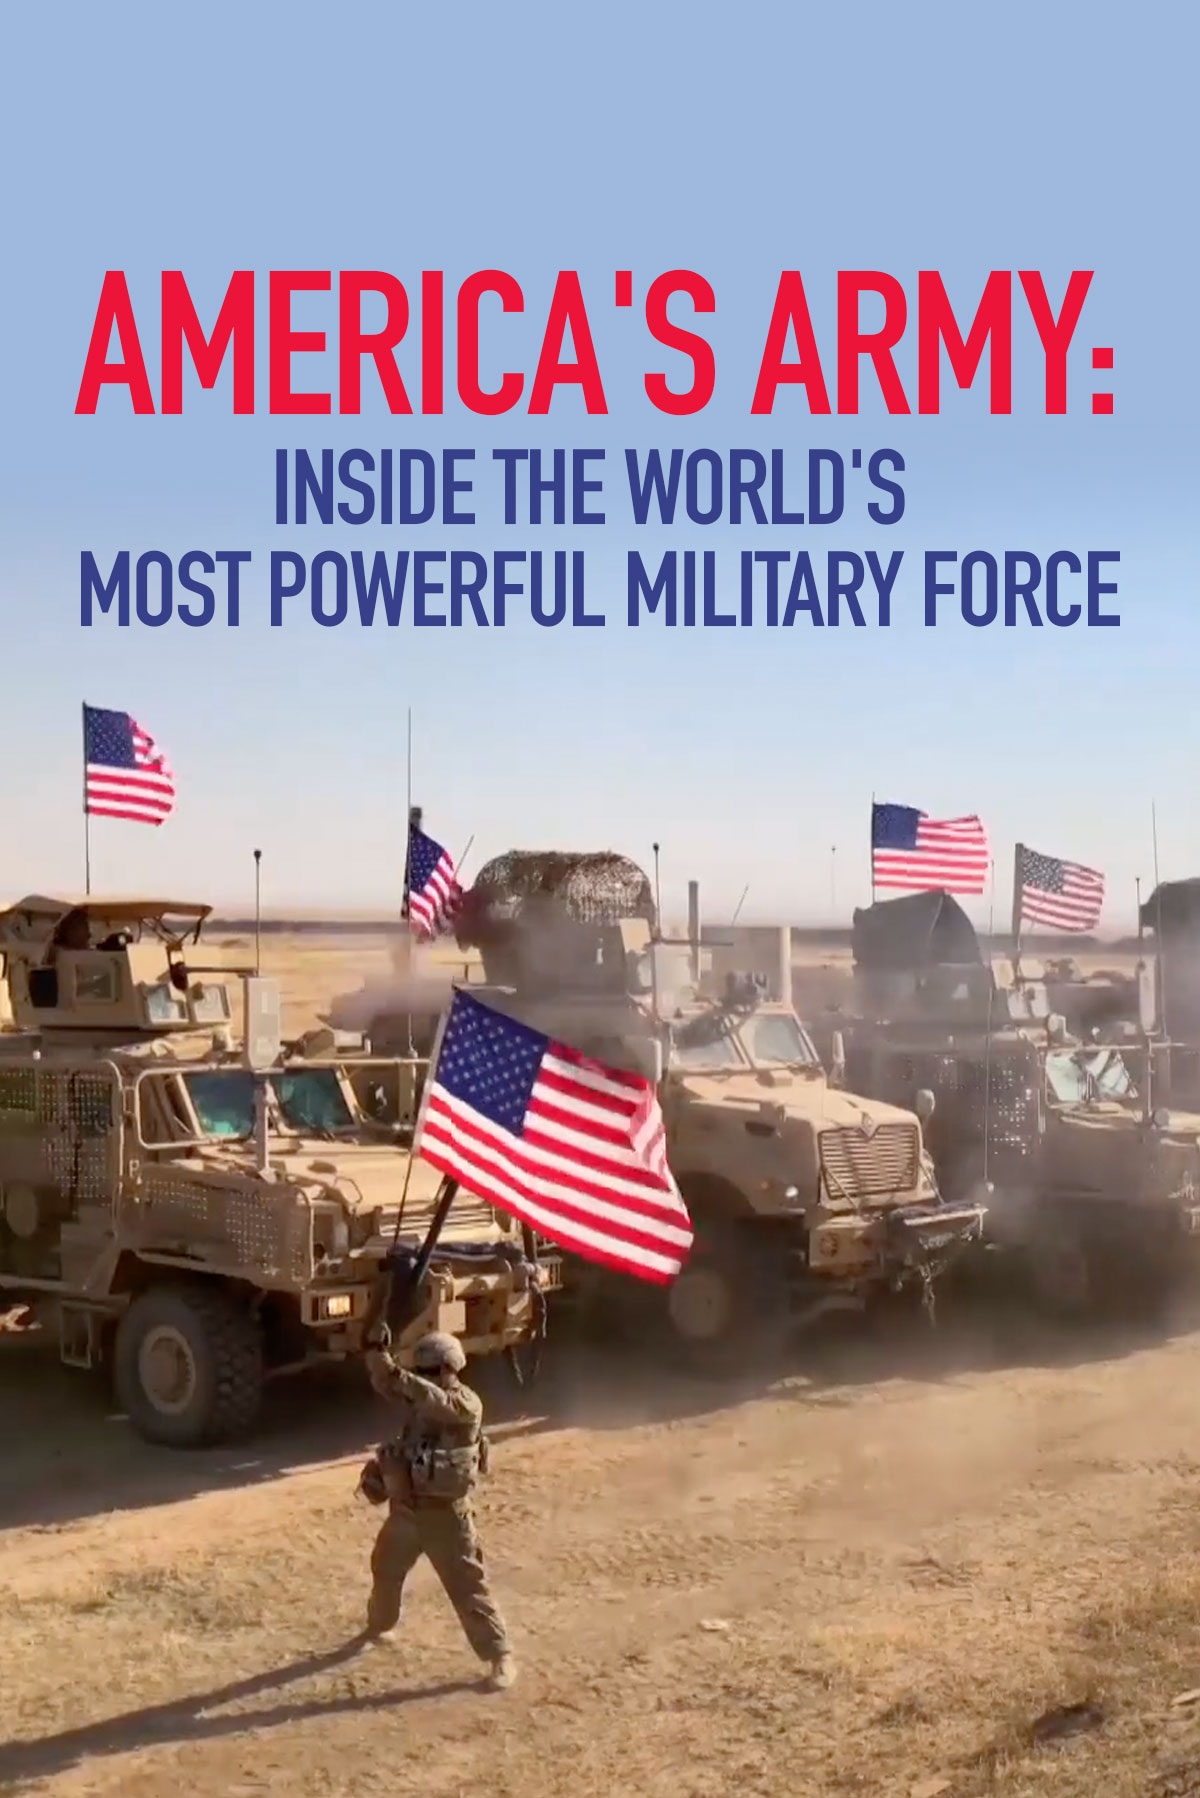 America's Army: Inside The World's Most Powerful Military Force